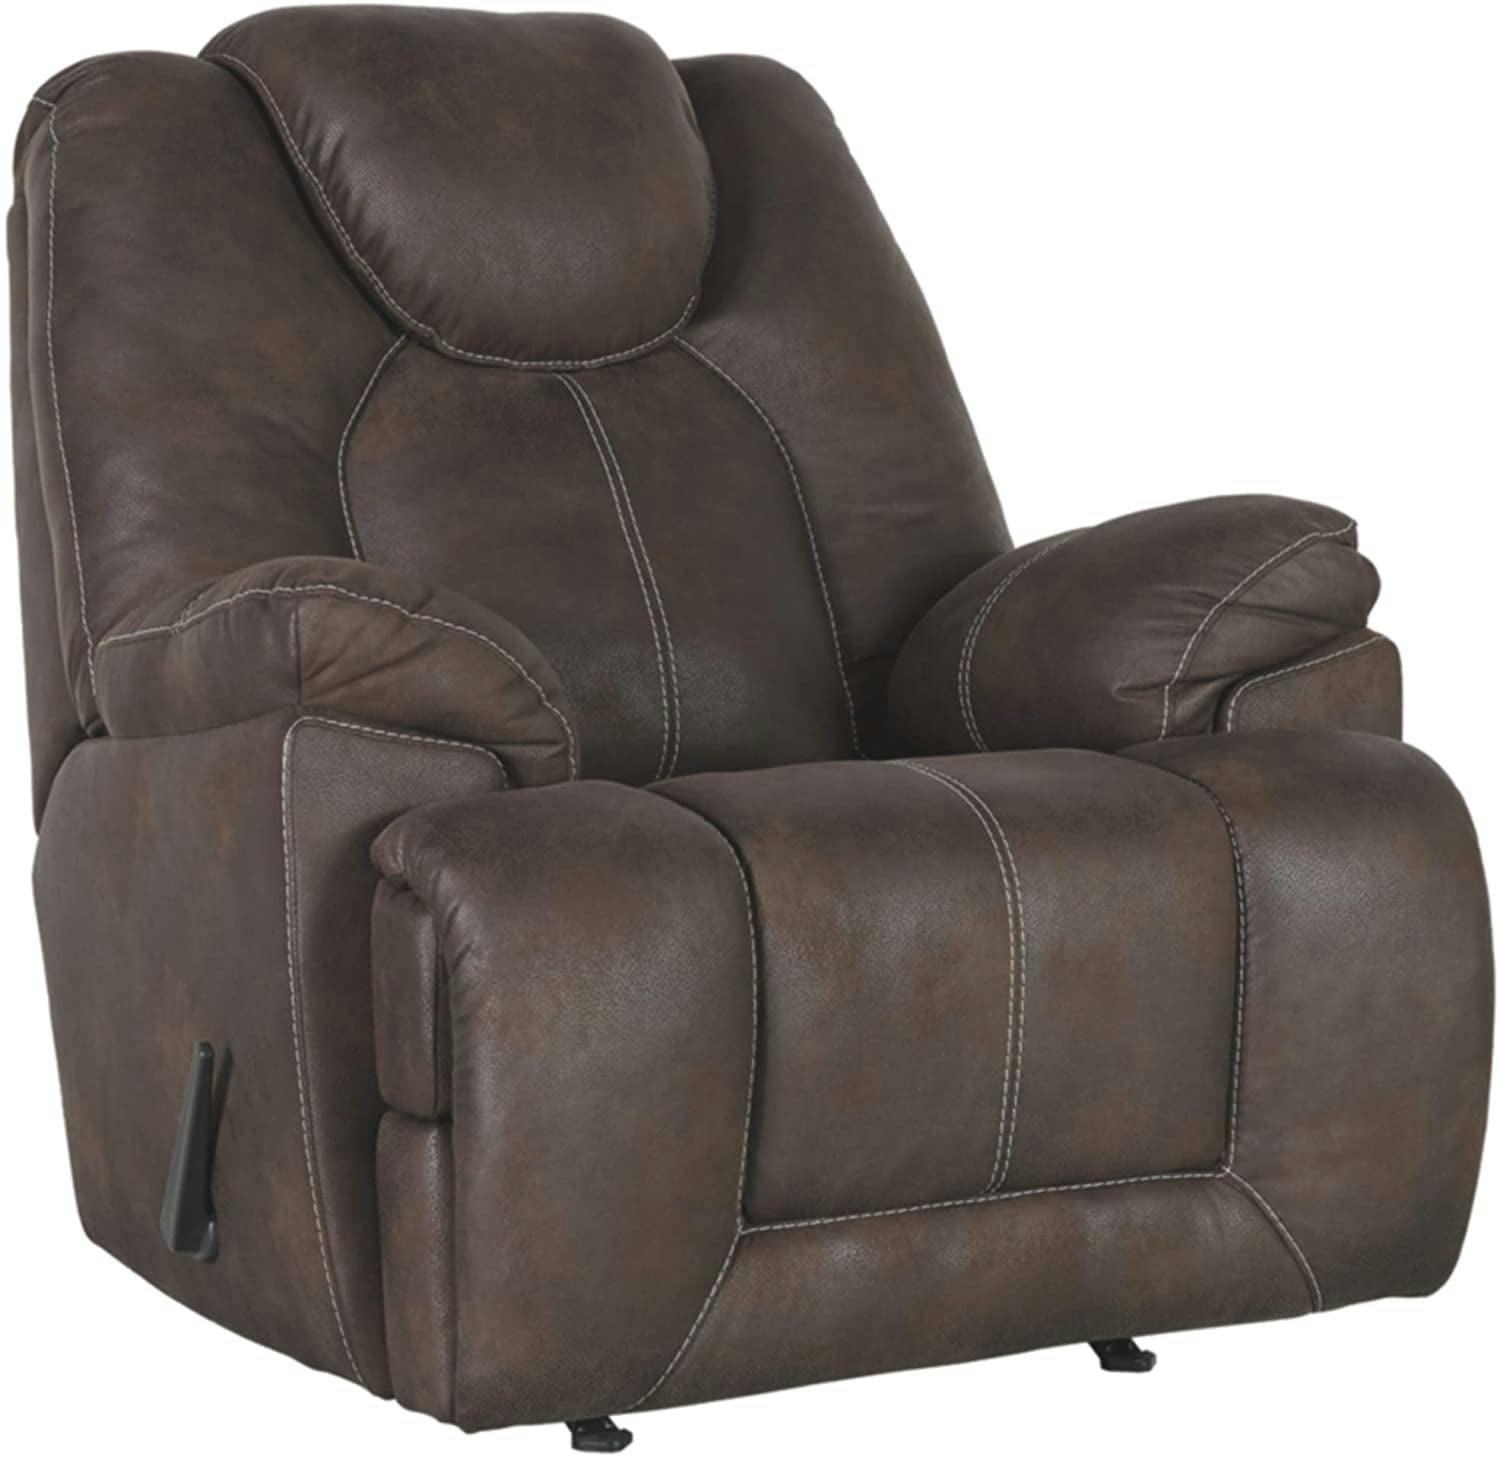 Contemporary Brown Faux Leather Oversized Recliner Chair